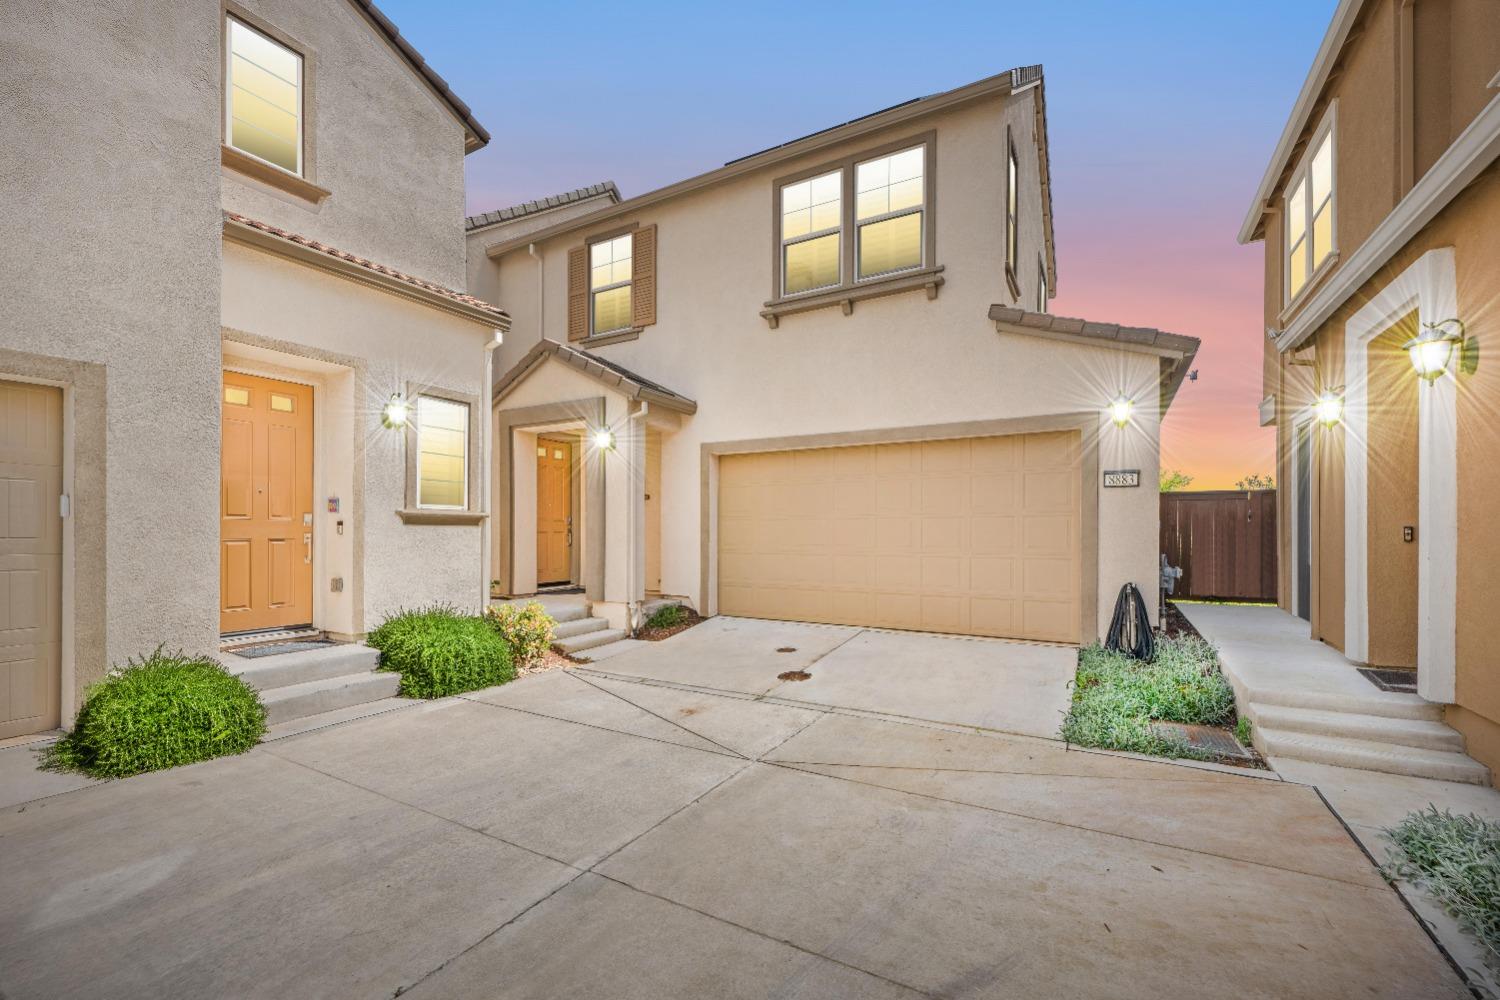 Welcome to Sterling Meadows, one of the most sought after communities in Elk Grove, CA. This newest 